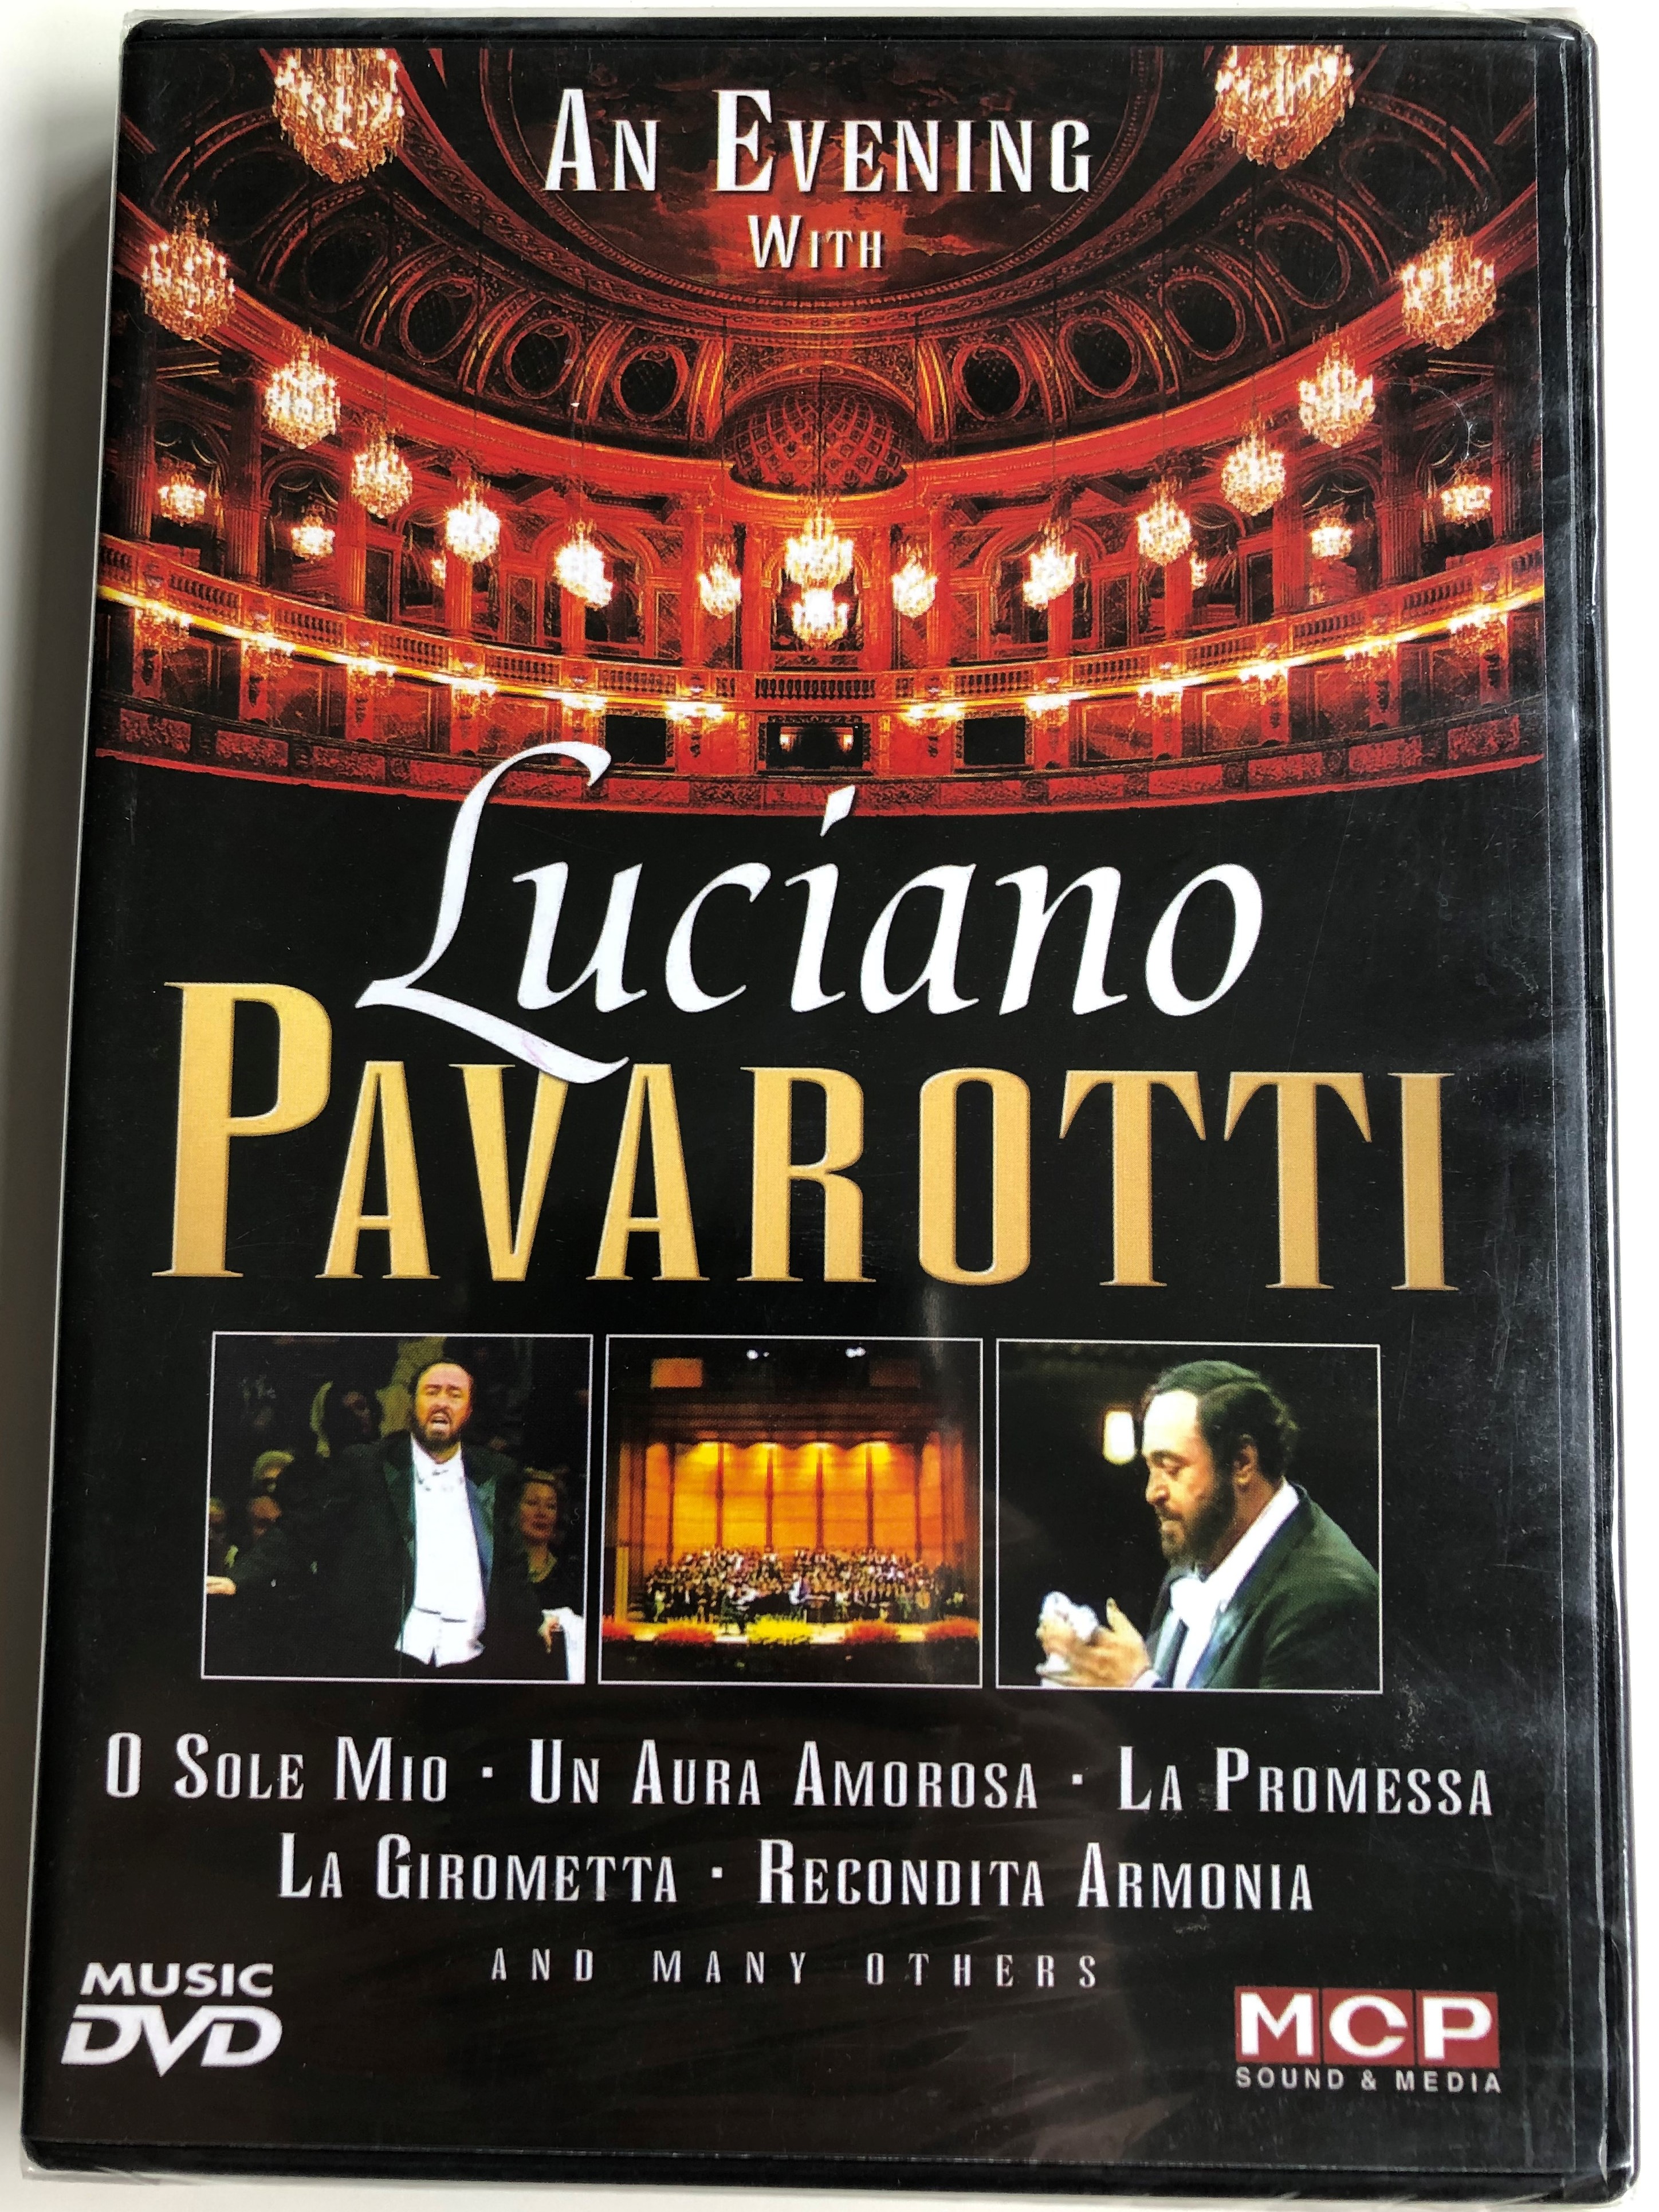 An evening with Luciano Pavarotti DVD O Sole mio, Un Aura Amorosa, La  Promessa and many others / MCP Sound & Media - Bible in My Language